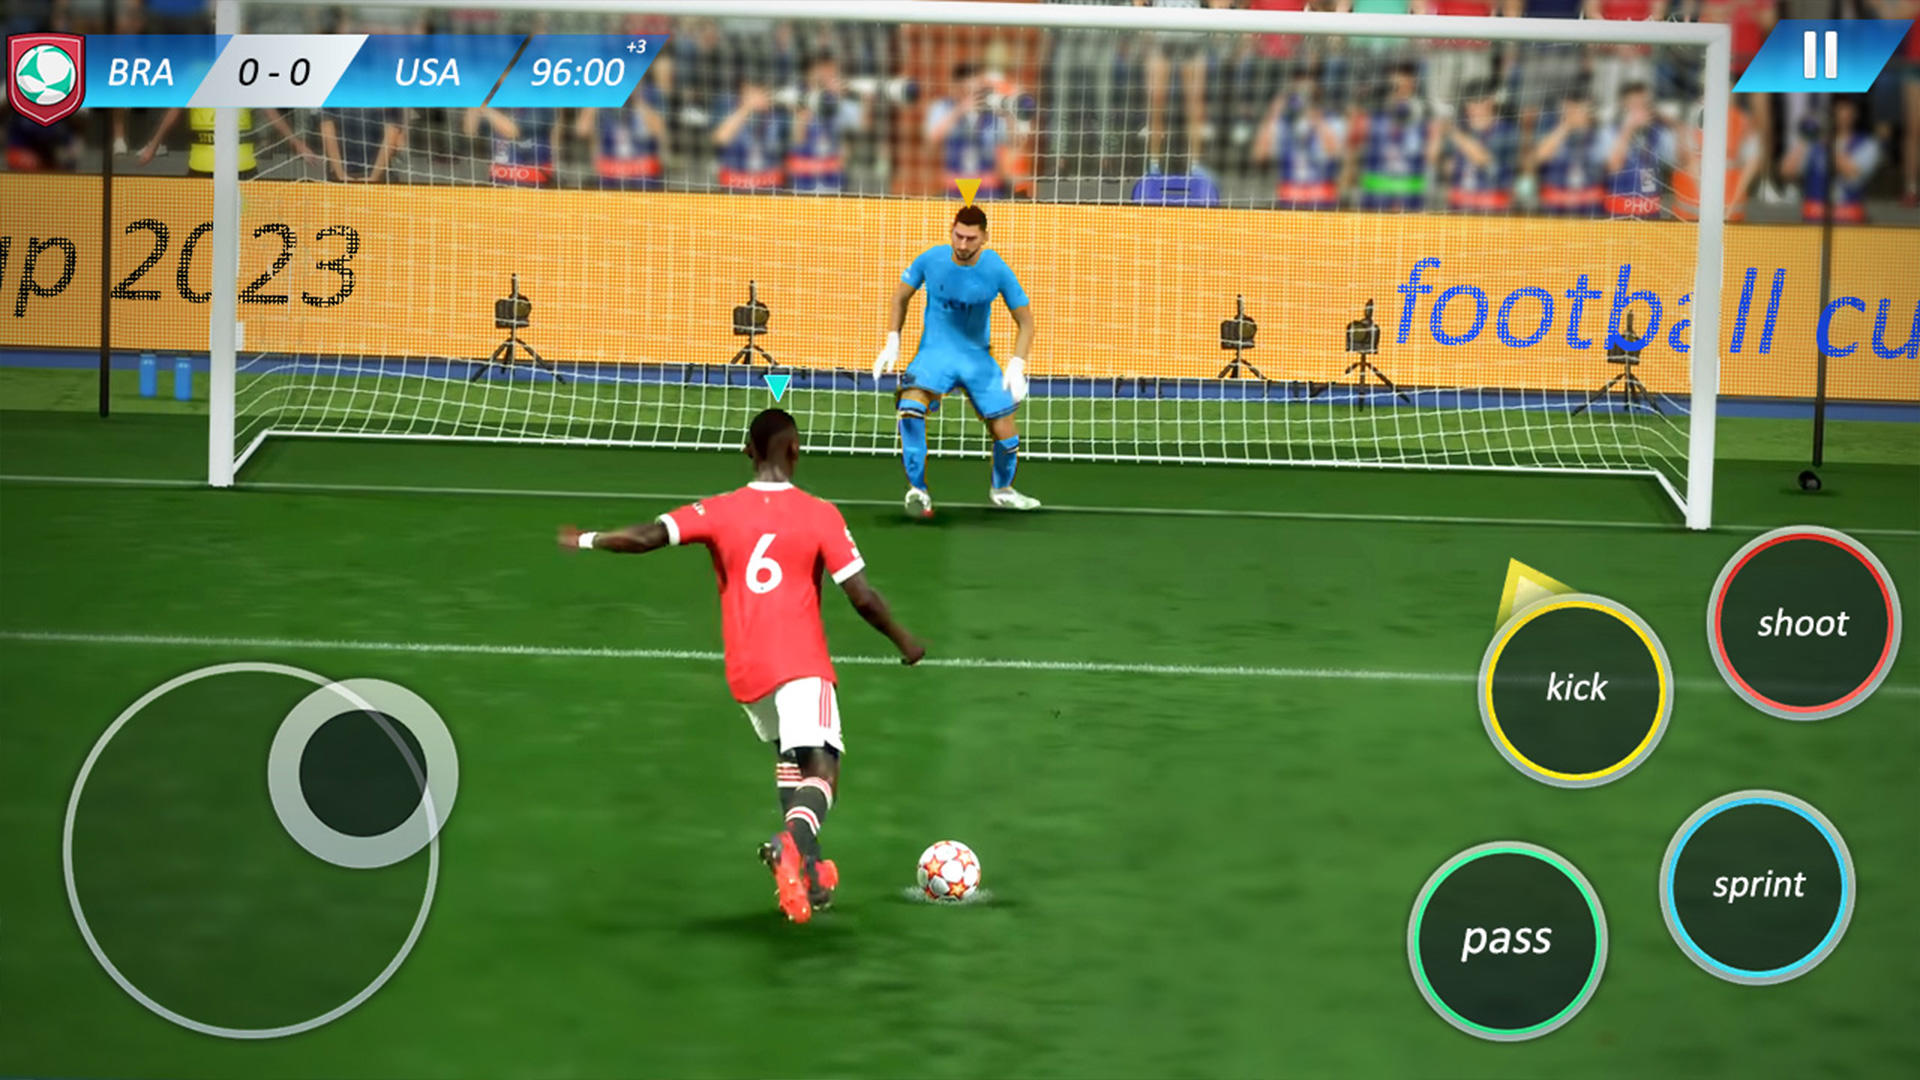 Real World Soccer Football 3D - Dream Football WorldCup Soccer League Hero  Super Star Crazy Striker Kick Score 2021::Appstore for Android